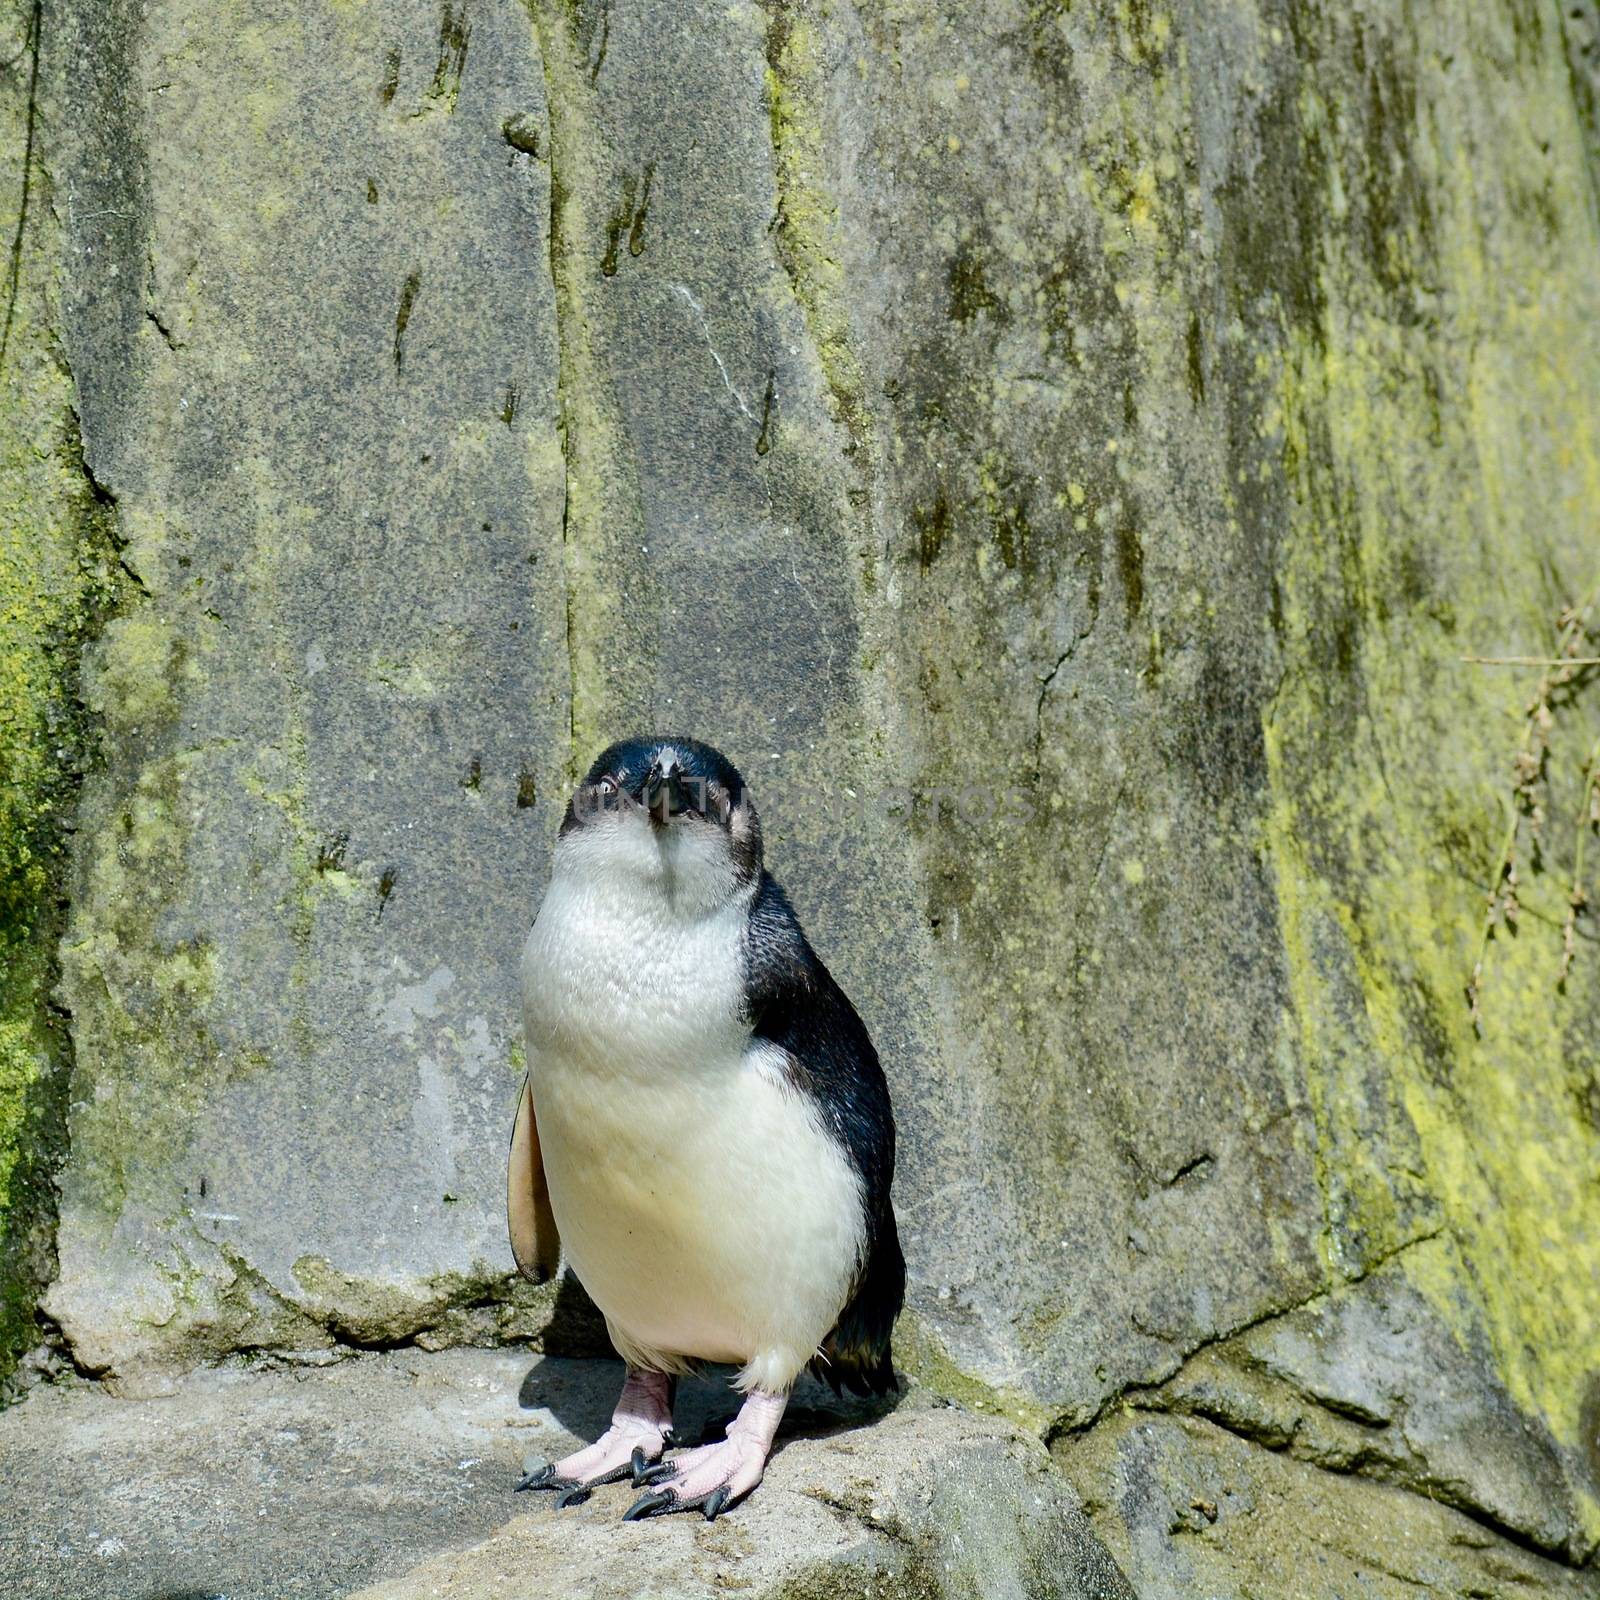 Penguins resqued from fishing nets, with lost wings.